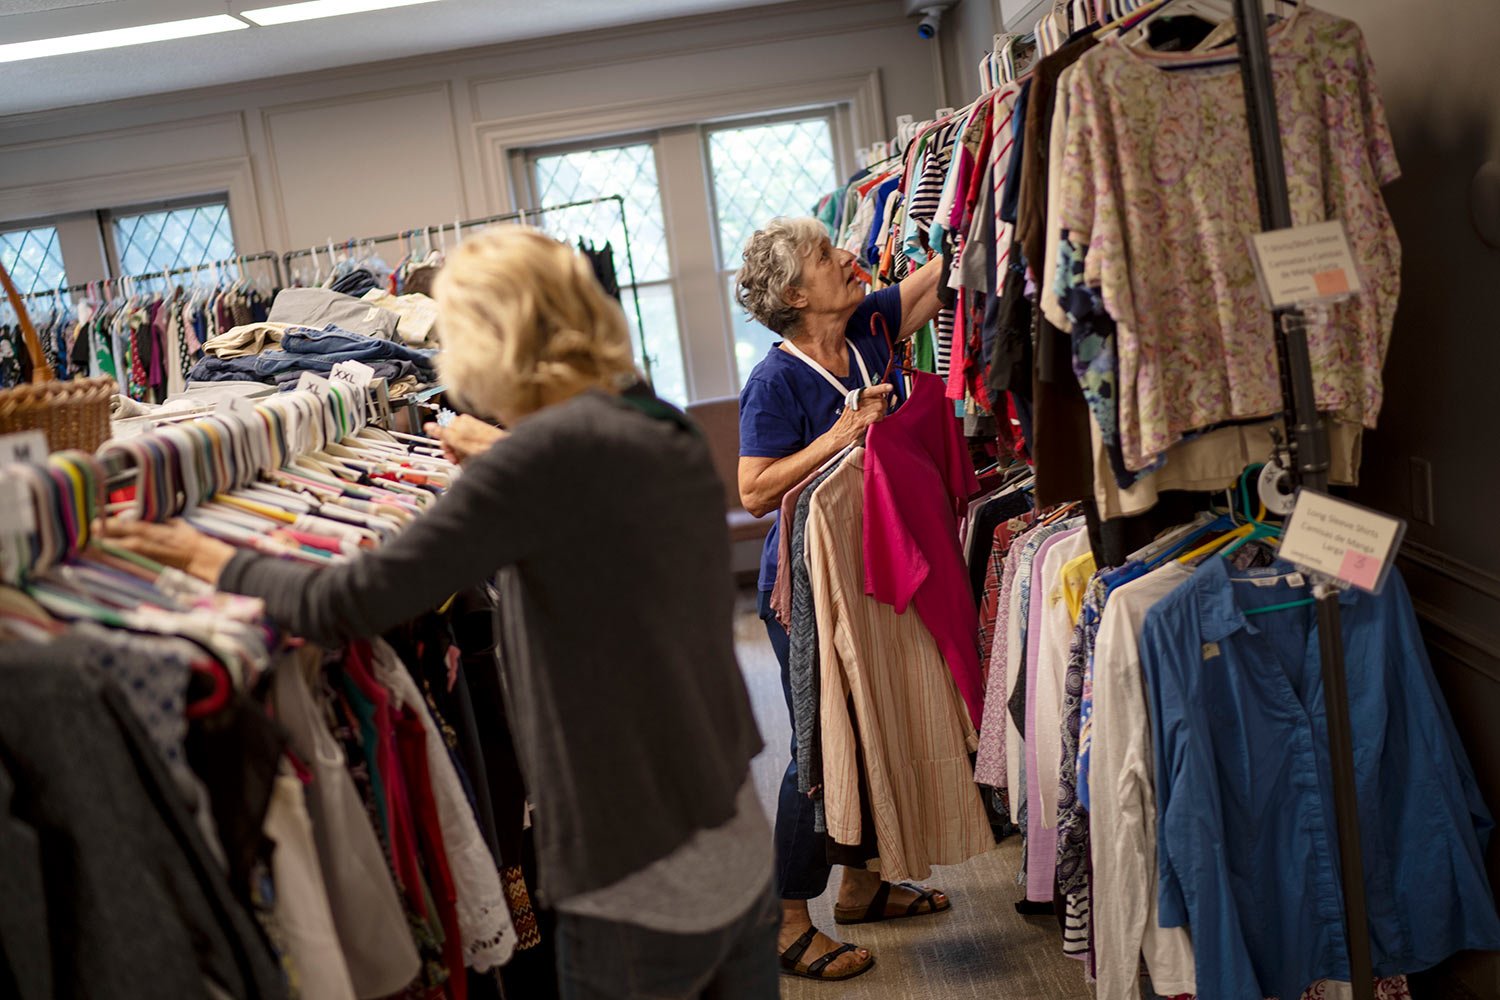  Volunteers Katherine Flynn, right, and Enid Schaefer stock donated clothes on a rack in the community outreach center at Asbury First United Methodist Church, Tuesday, Aug. 22, 2023, in Rochester, N.Y. (AP Photo/David Goldman)  